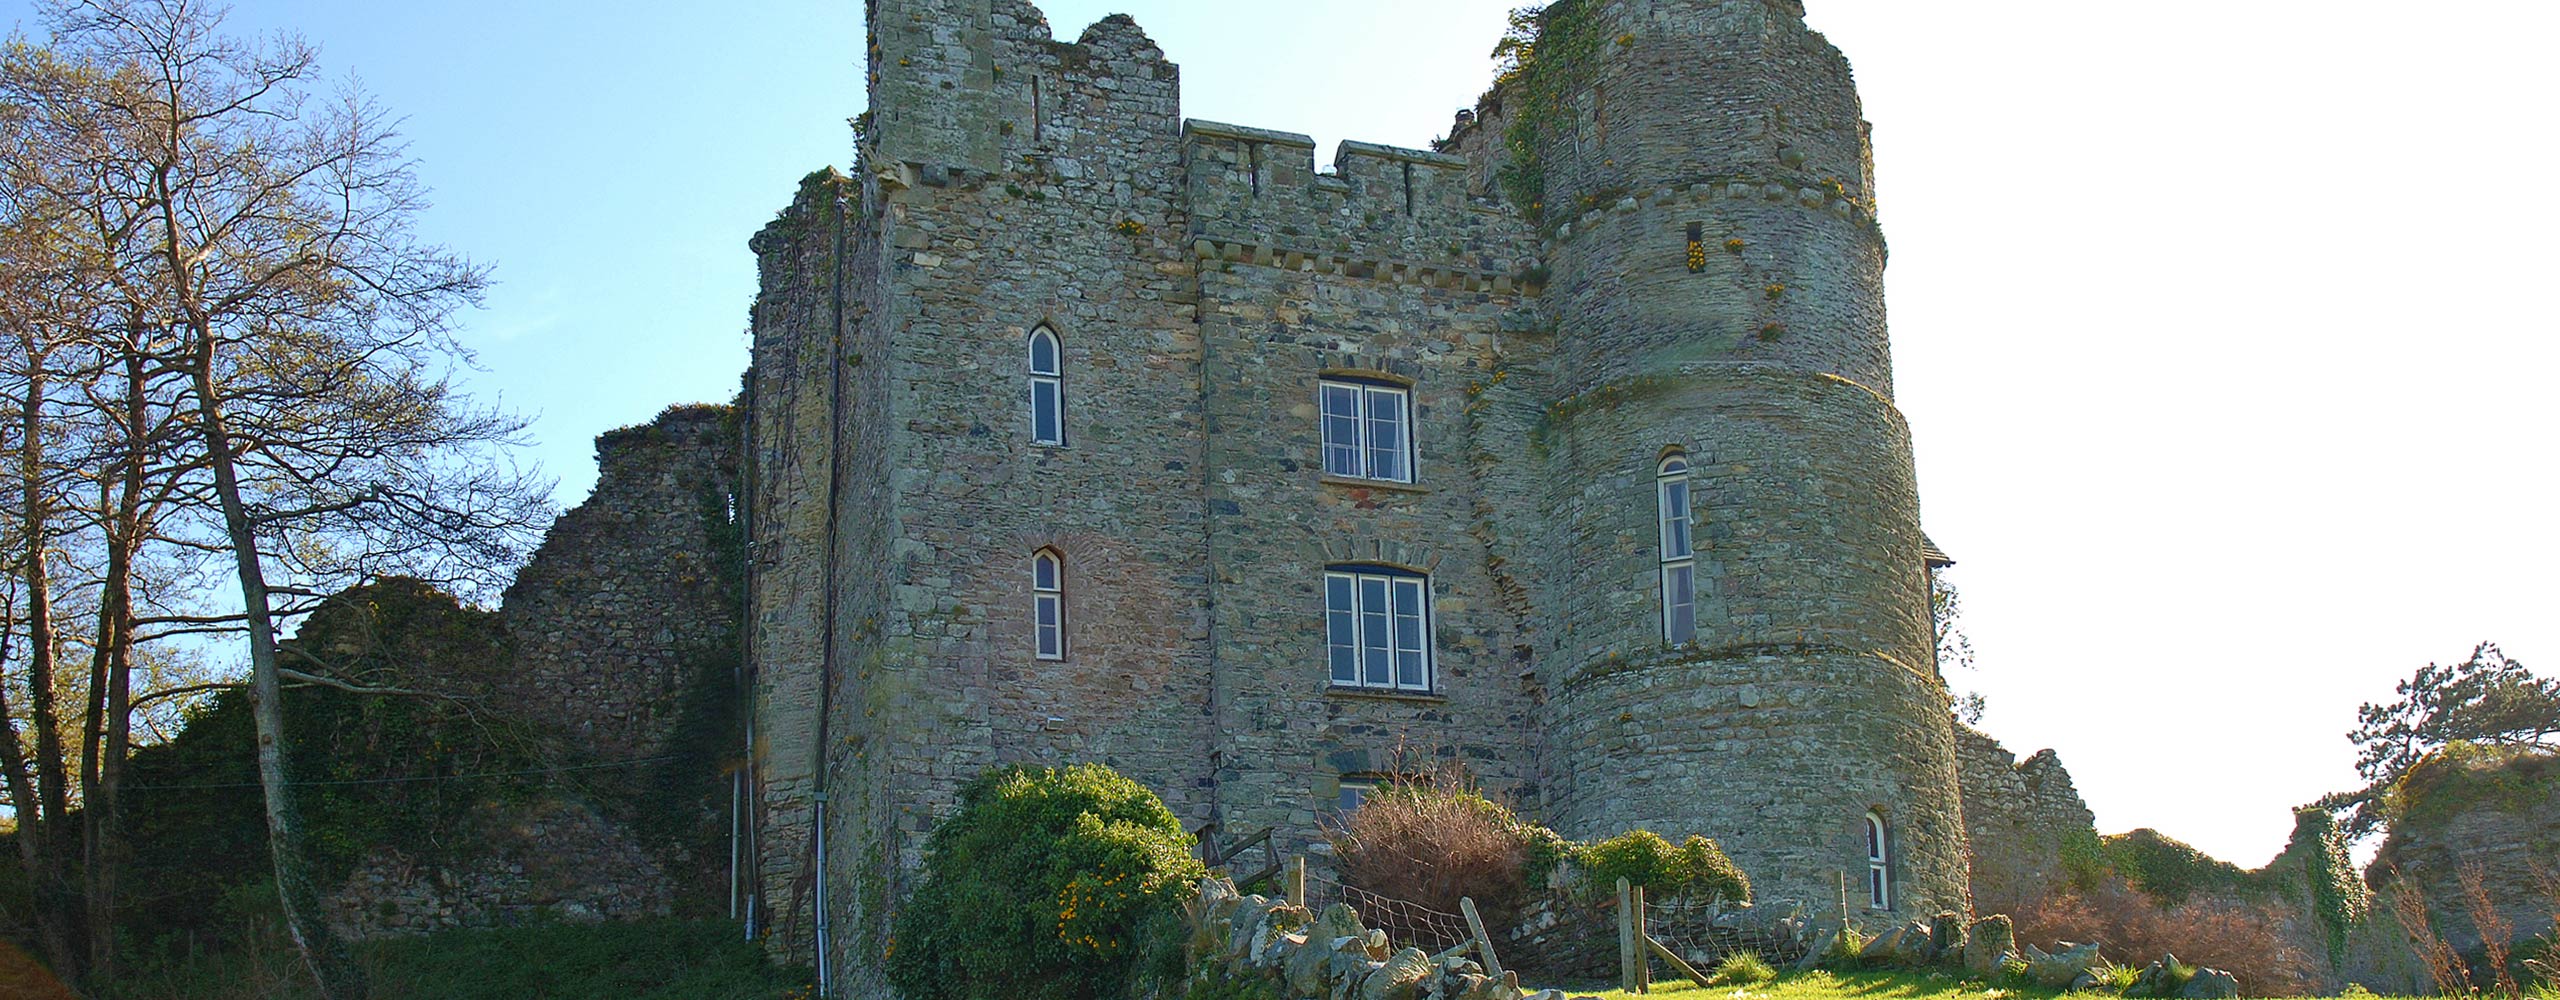 Newport castle from the north